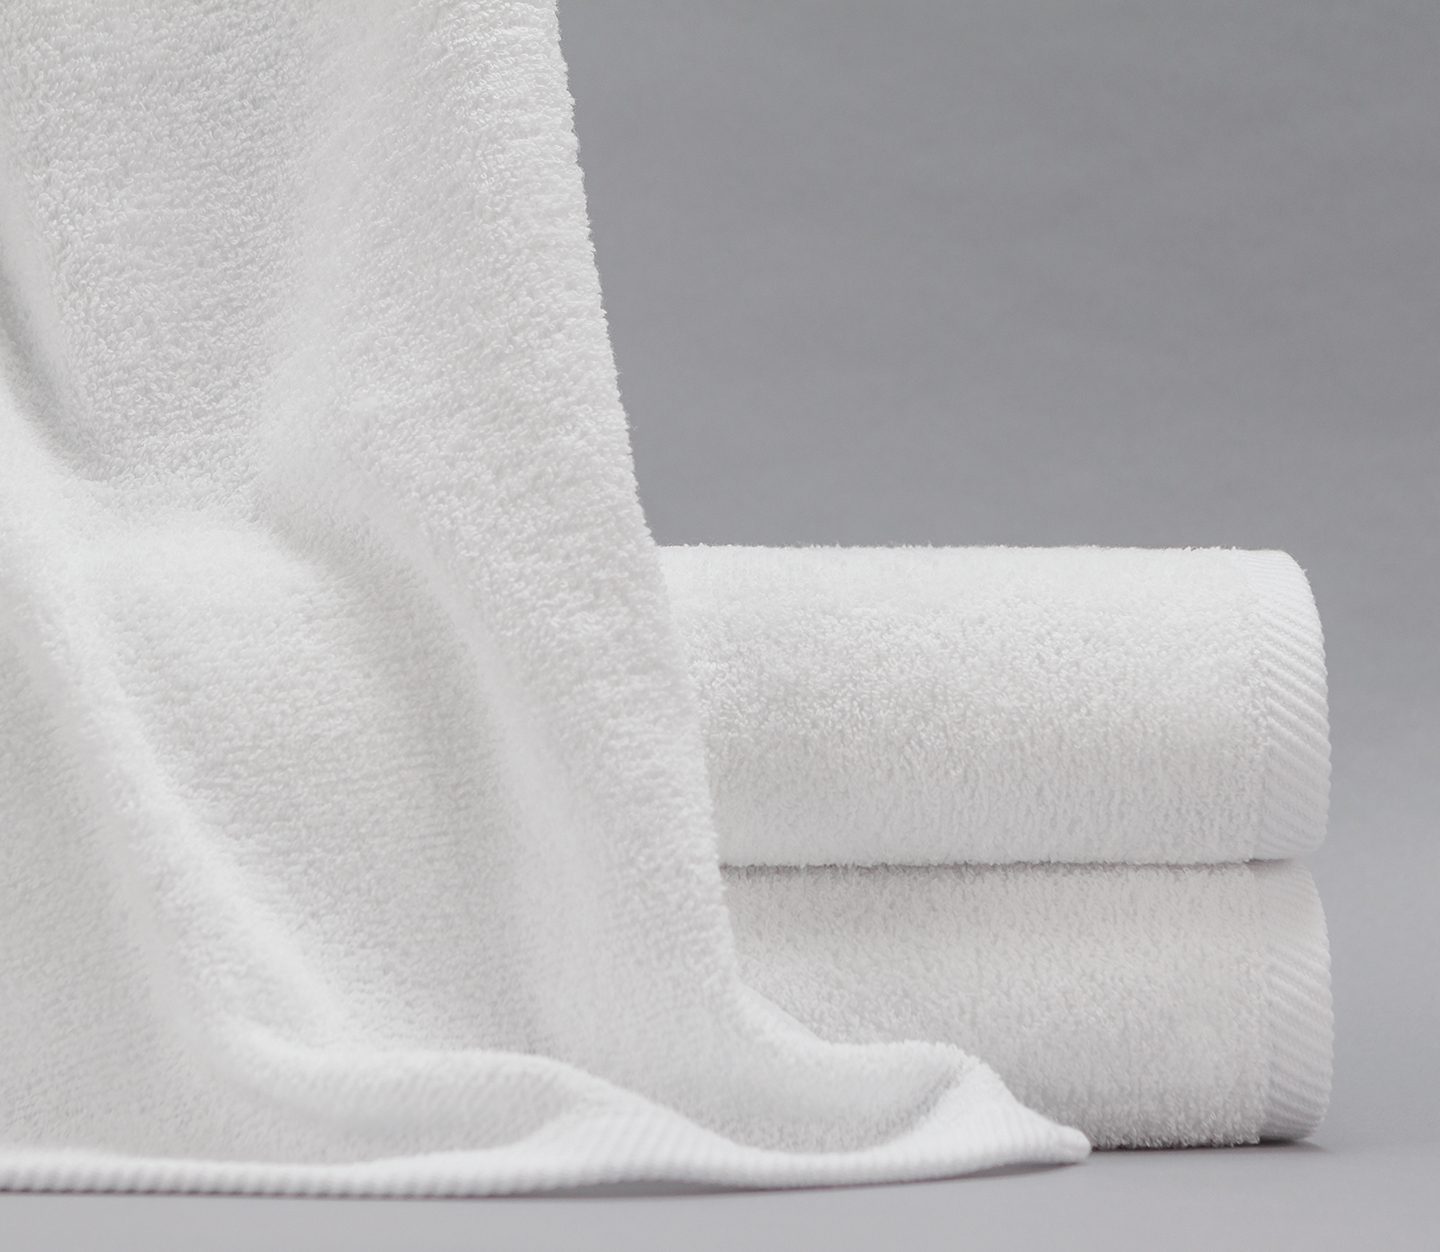 Should You Store Towels in the Bathroom? Experts Weigh In